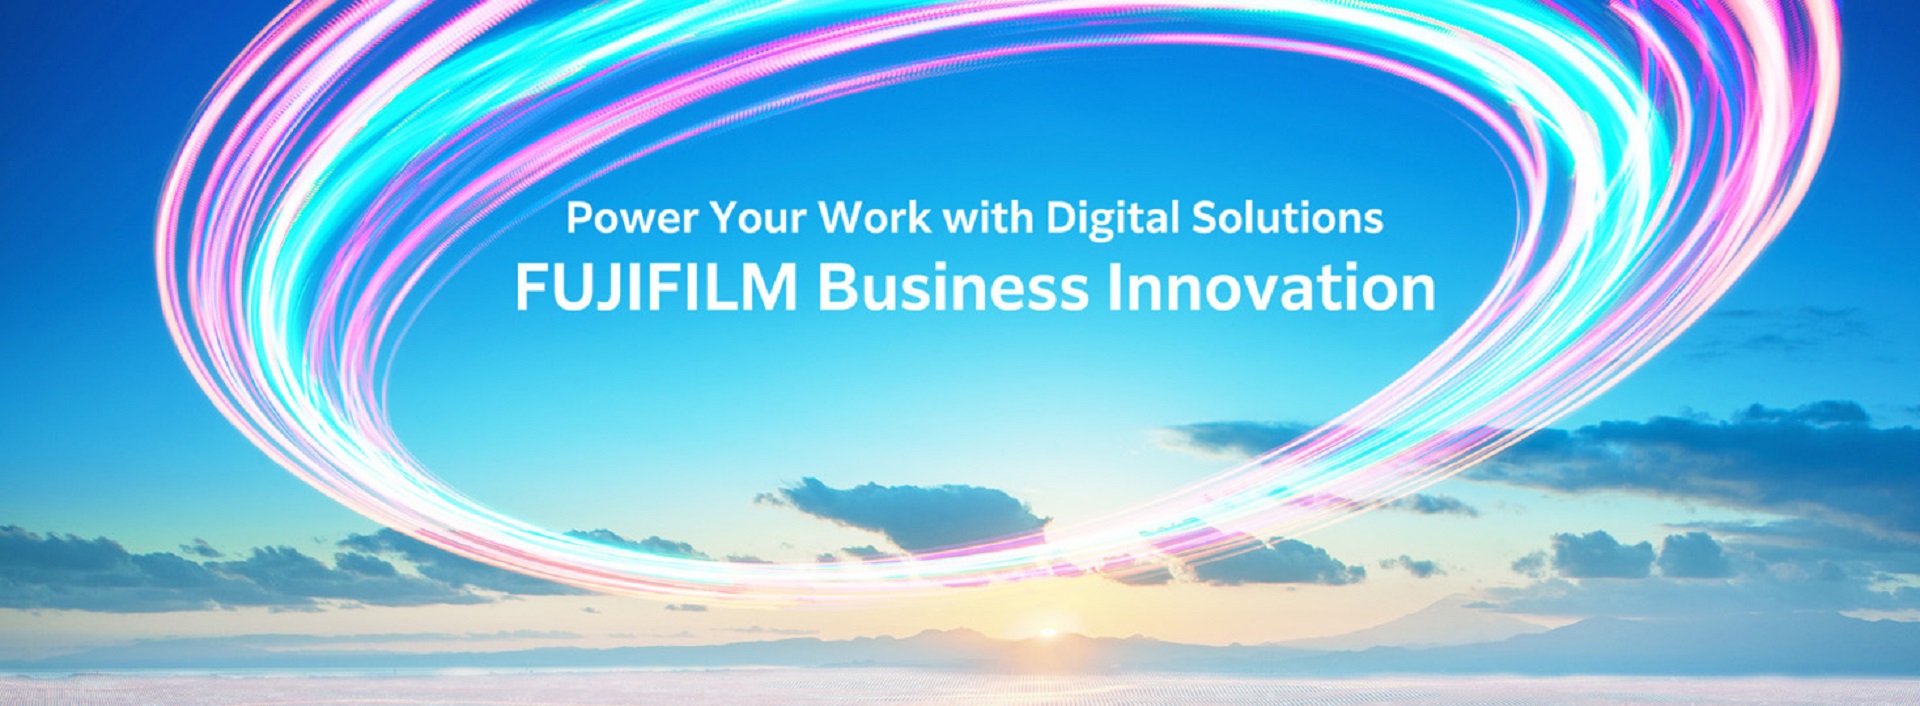 Power Your Work with Digital Solutions